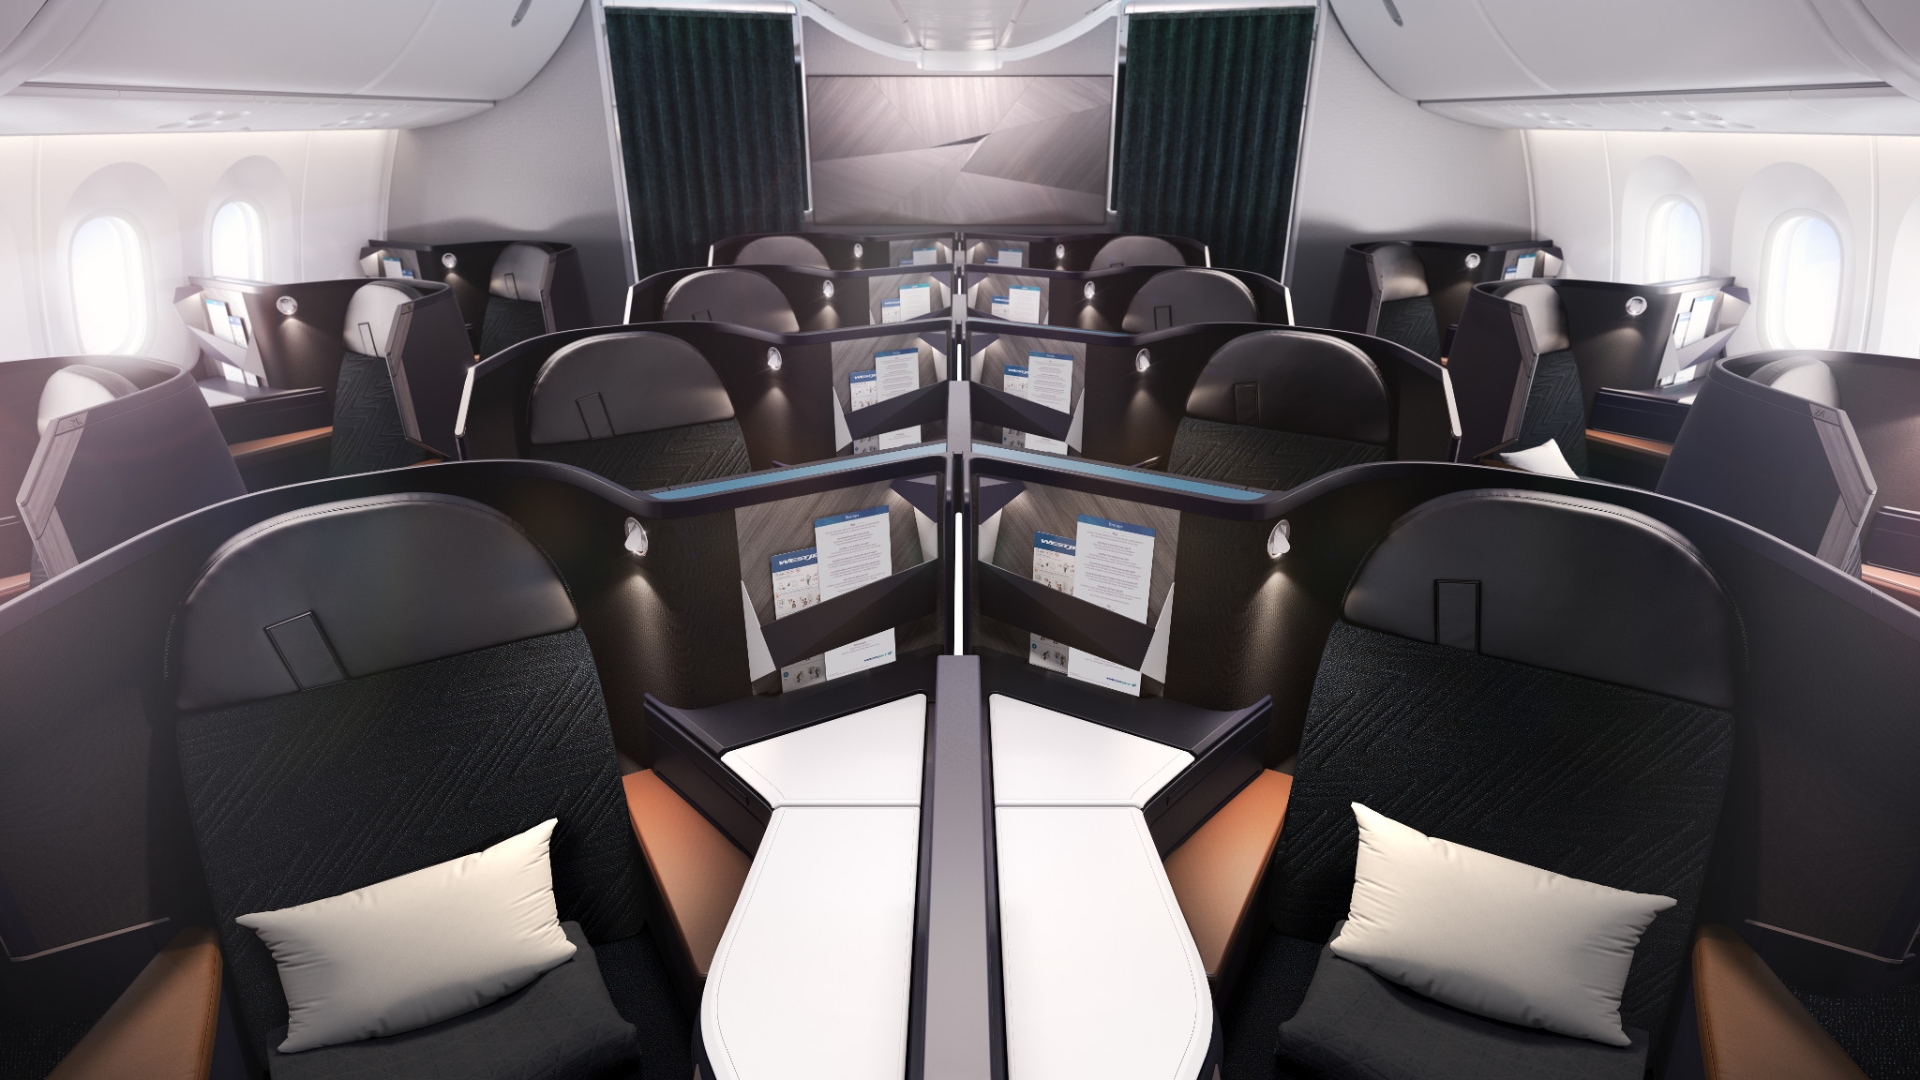 TAKING CARE OF BUSINESS. Meet WestJet's first-ever Business Cabin on board its new 787-9 Dreamliner. 